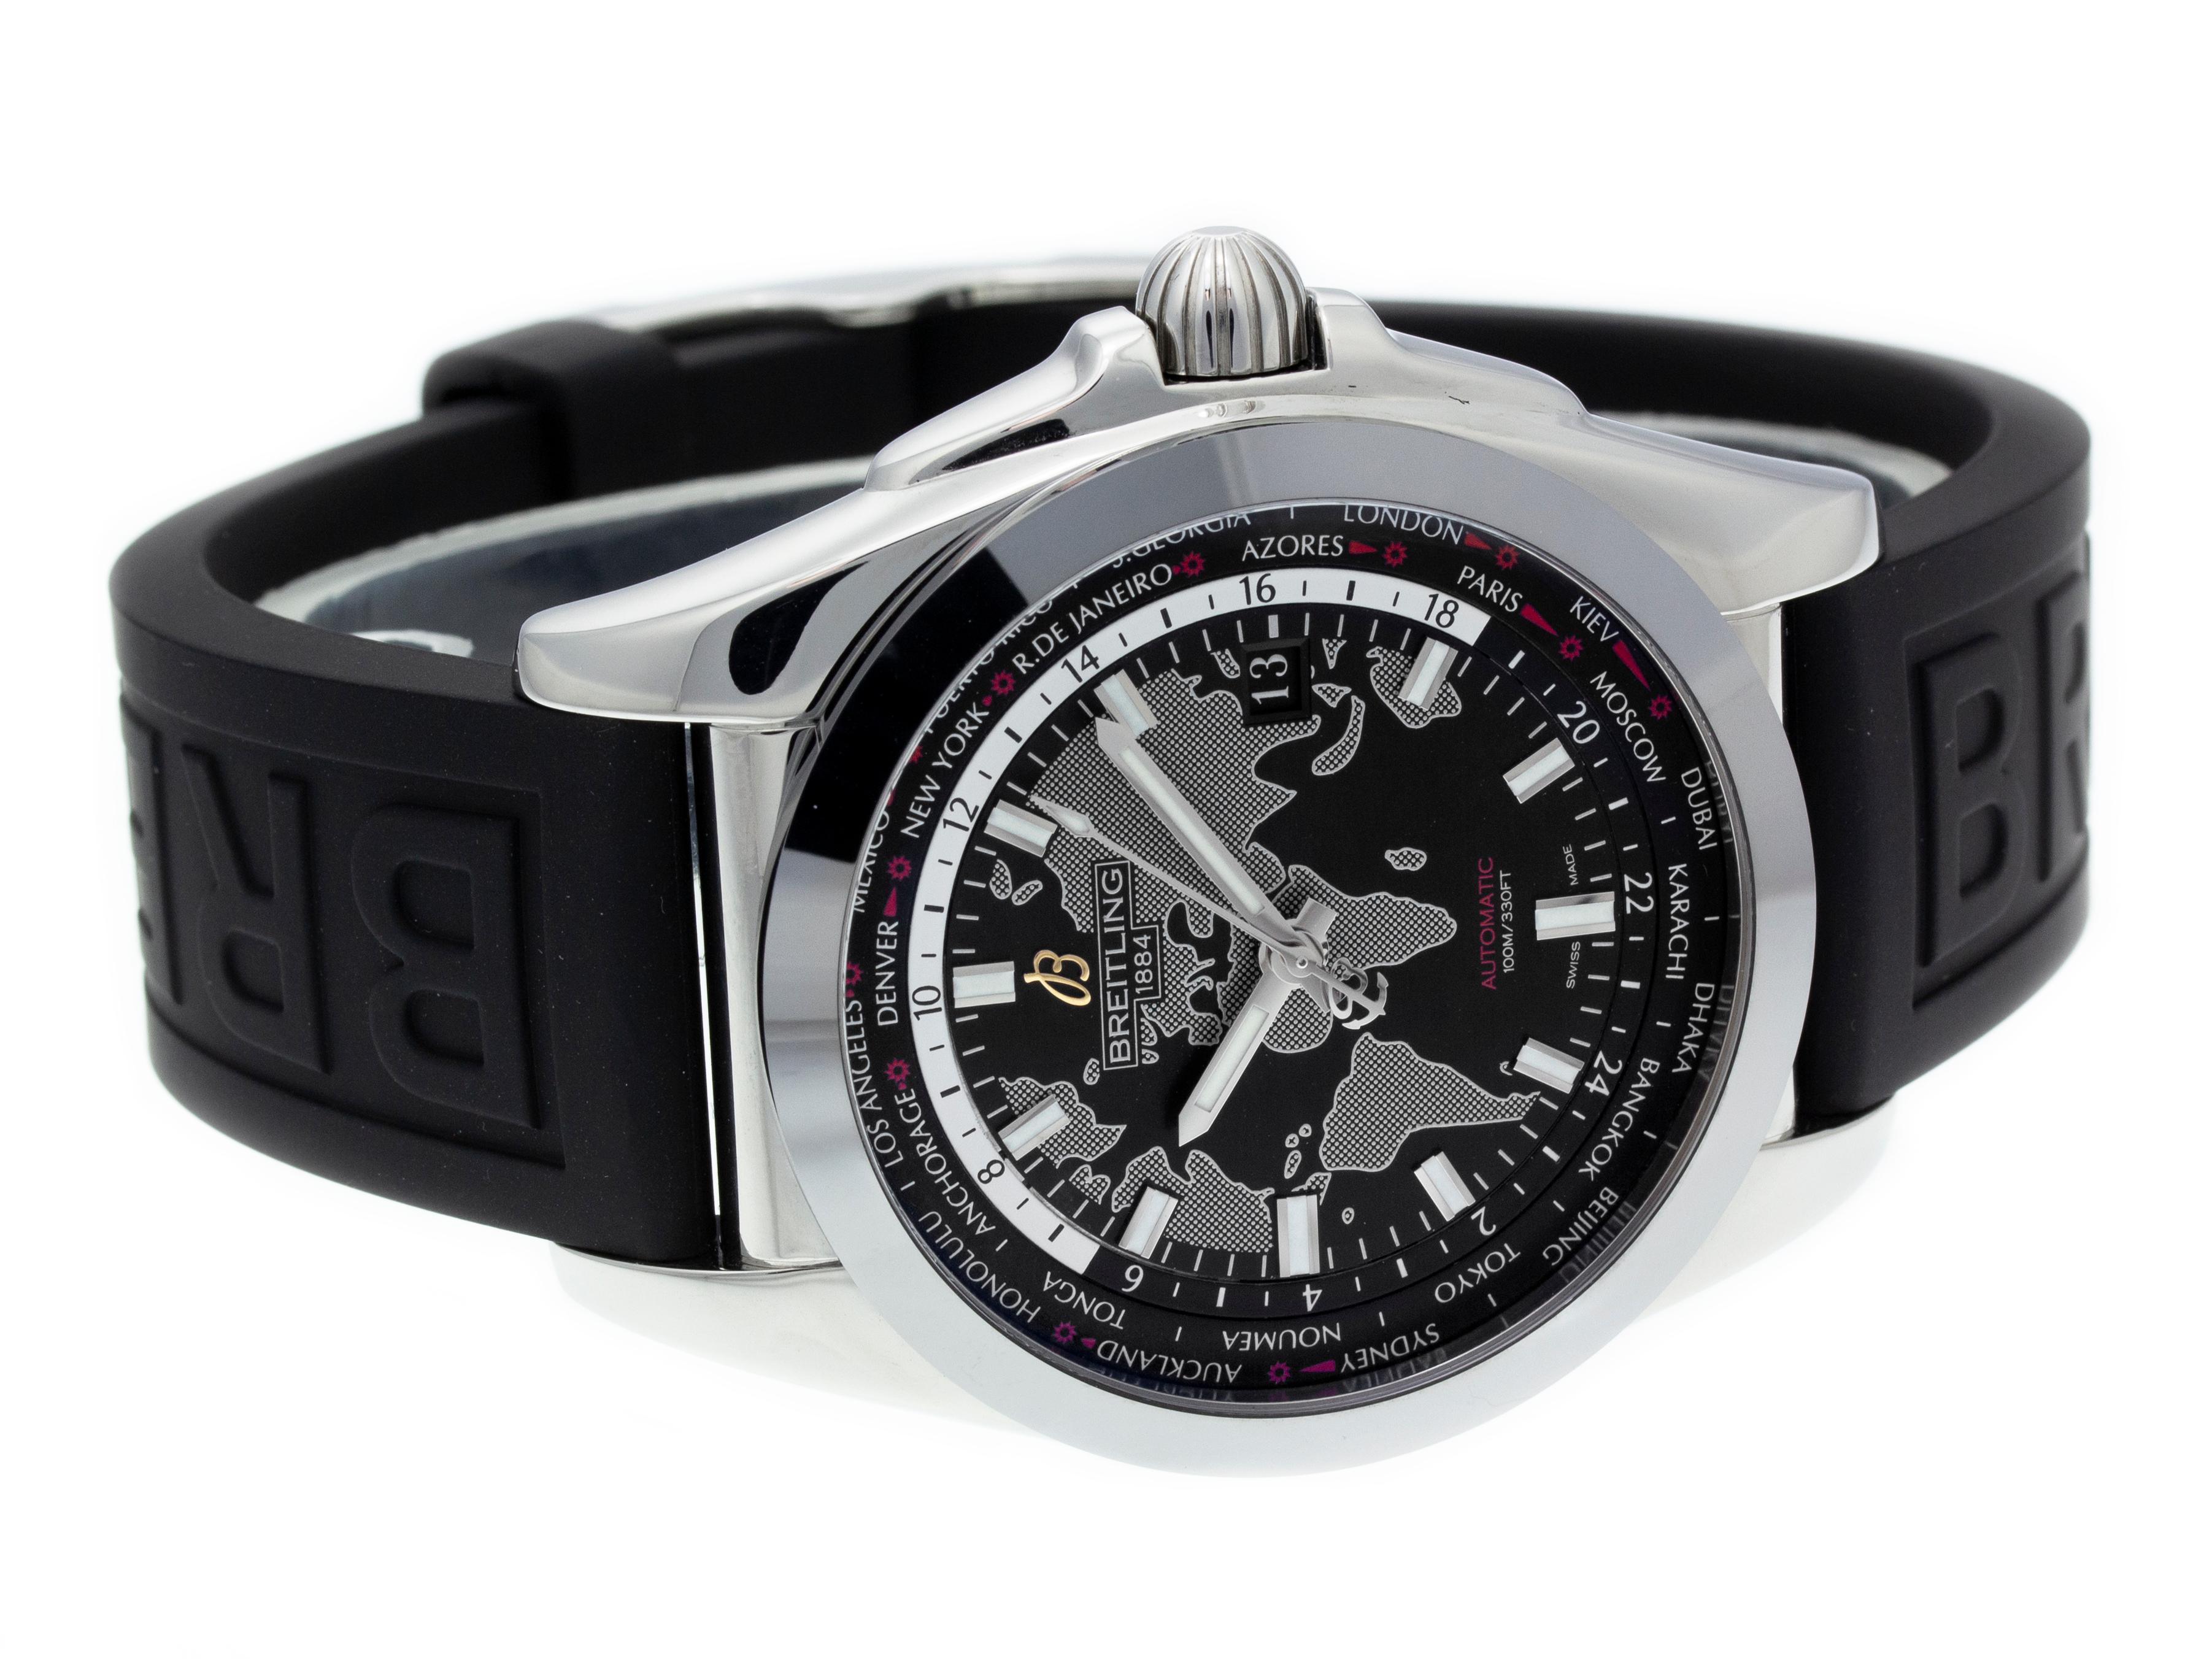 Breitling Galactic 44 Unitime WB3510U4/BD94 im Zustand „Hervorragend“ im Angebot in Willow Grove, PA